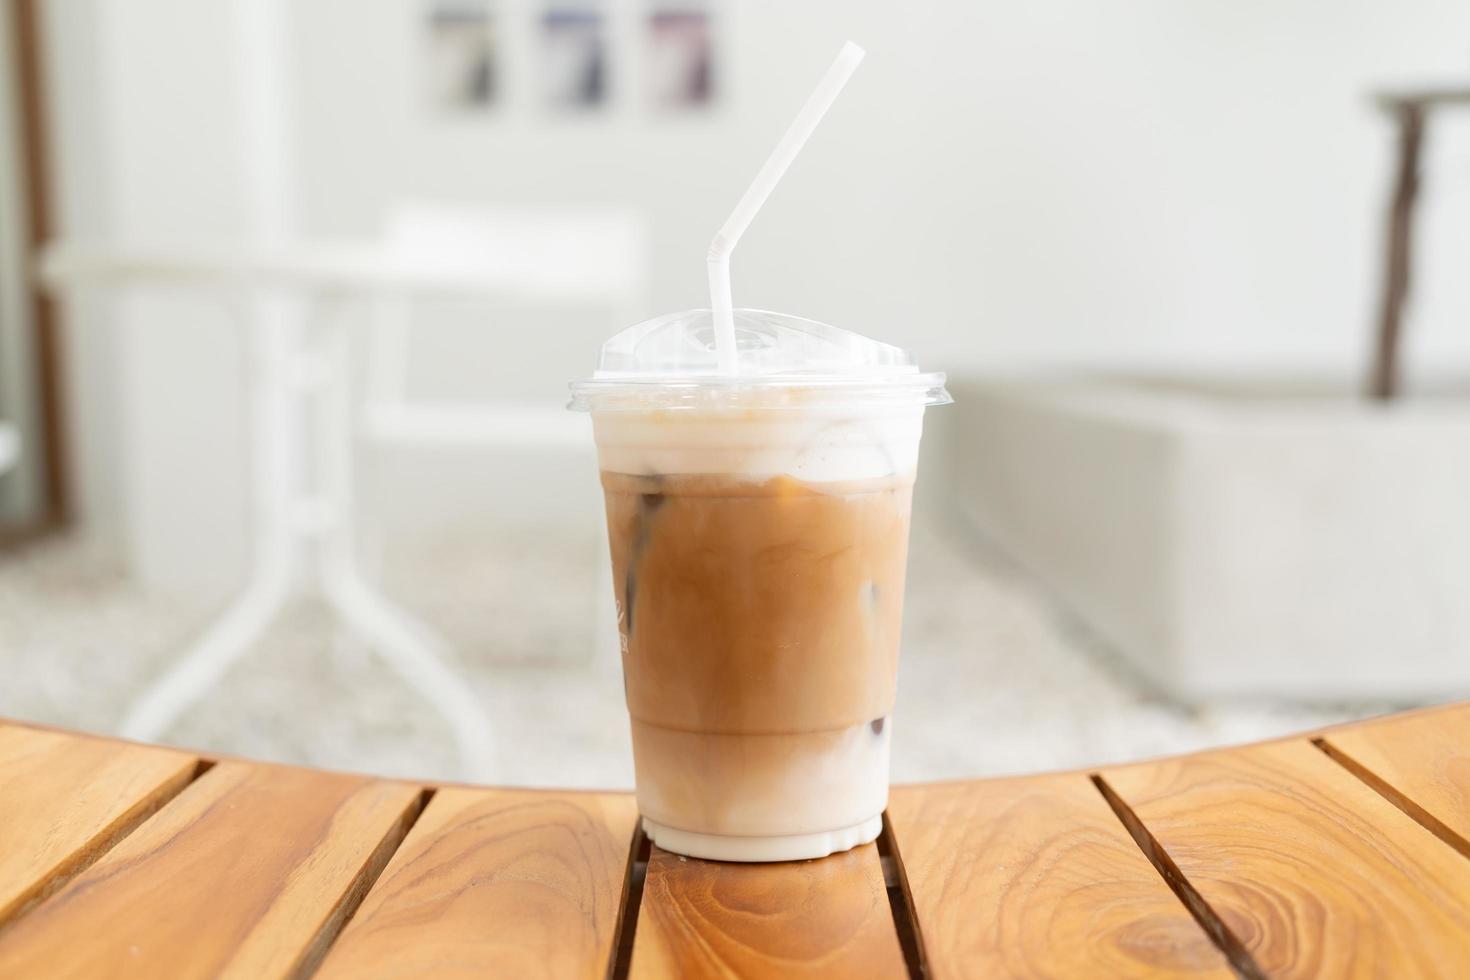 Fresh coffee, iced cappuccino, Macchiato, latte with separate milk and coffee. Coffee in a plastic cup on a wooden table. plastic iced coffee mug on wooden table photo